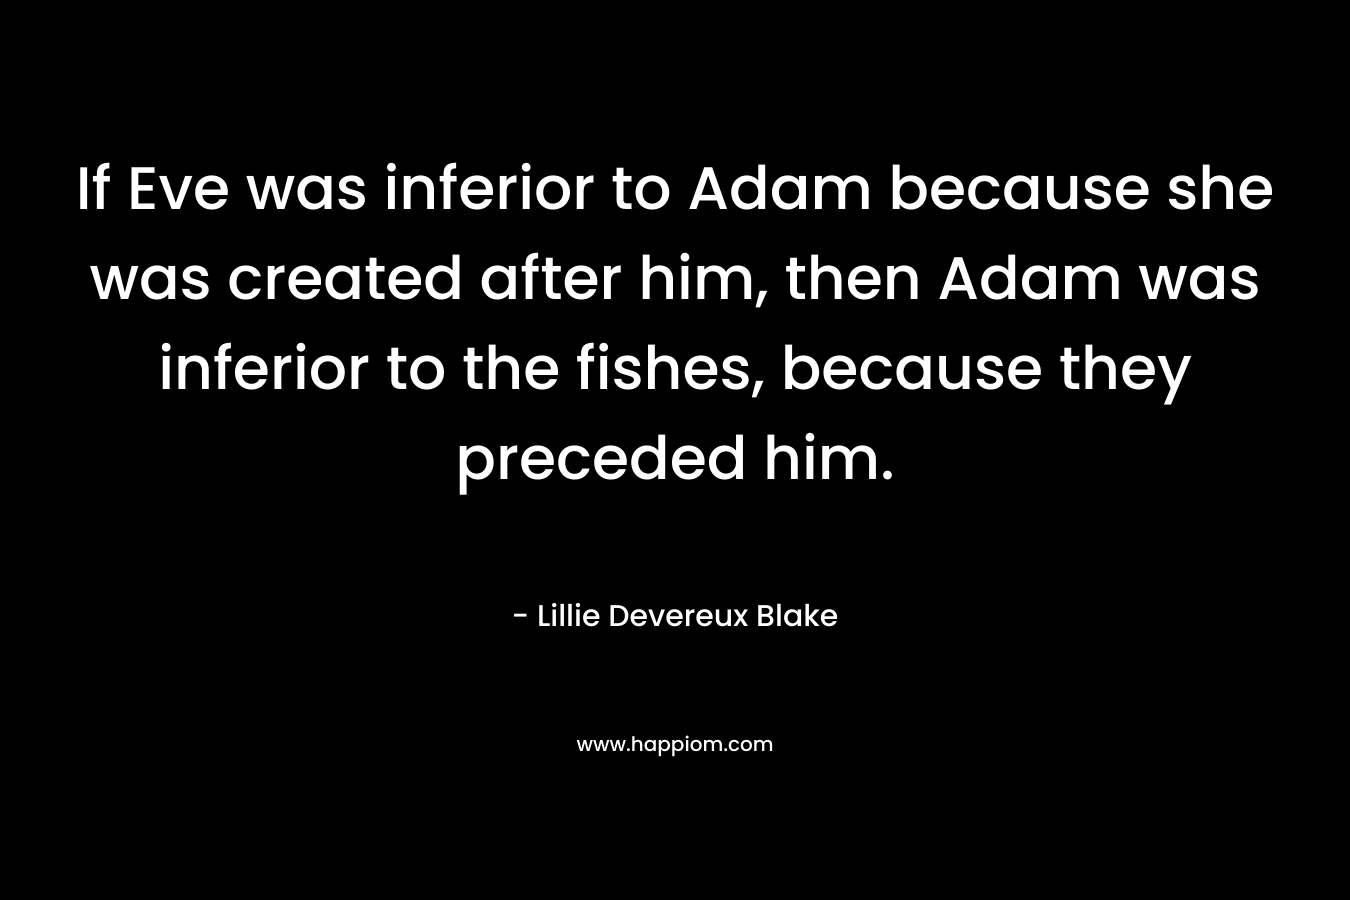 If Eve was inferior to Adam because she was created after him, then Adam was inferior to the fishes, because they preceded him.